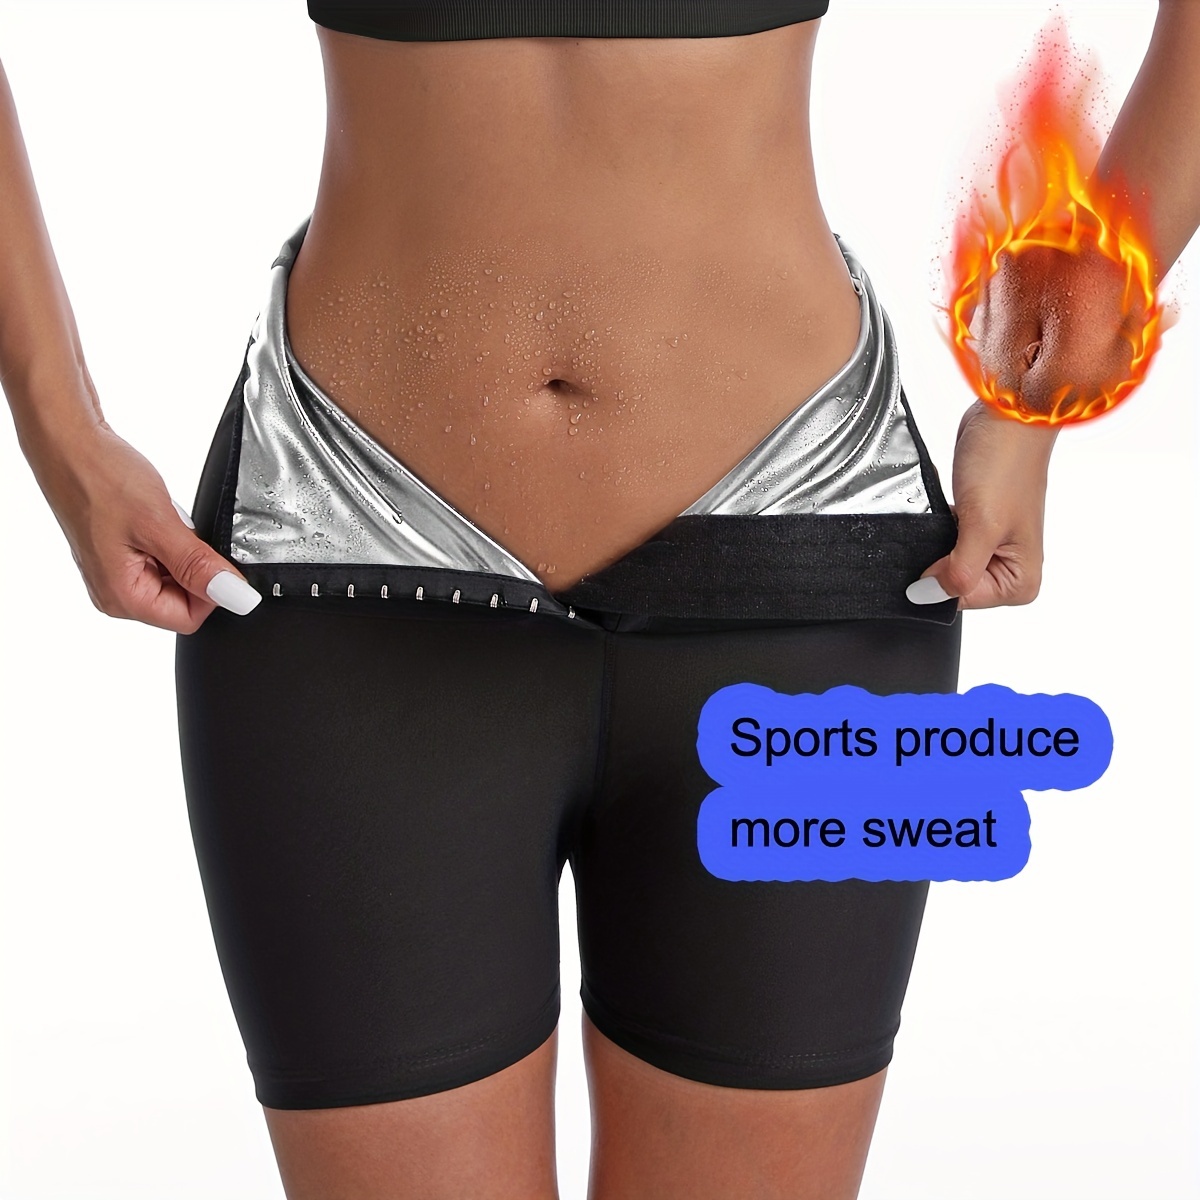 Hot Thermo Body Shaper Sweat Sauna Pants for Men - Weight Loss Leggings for  Exercise and Workout Training